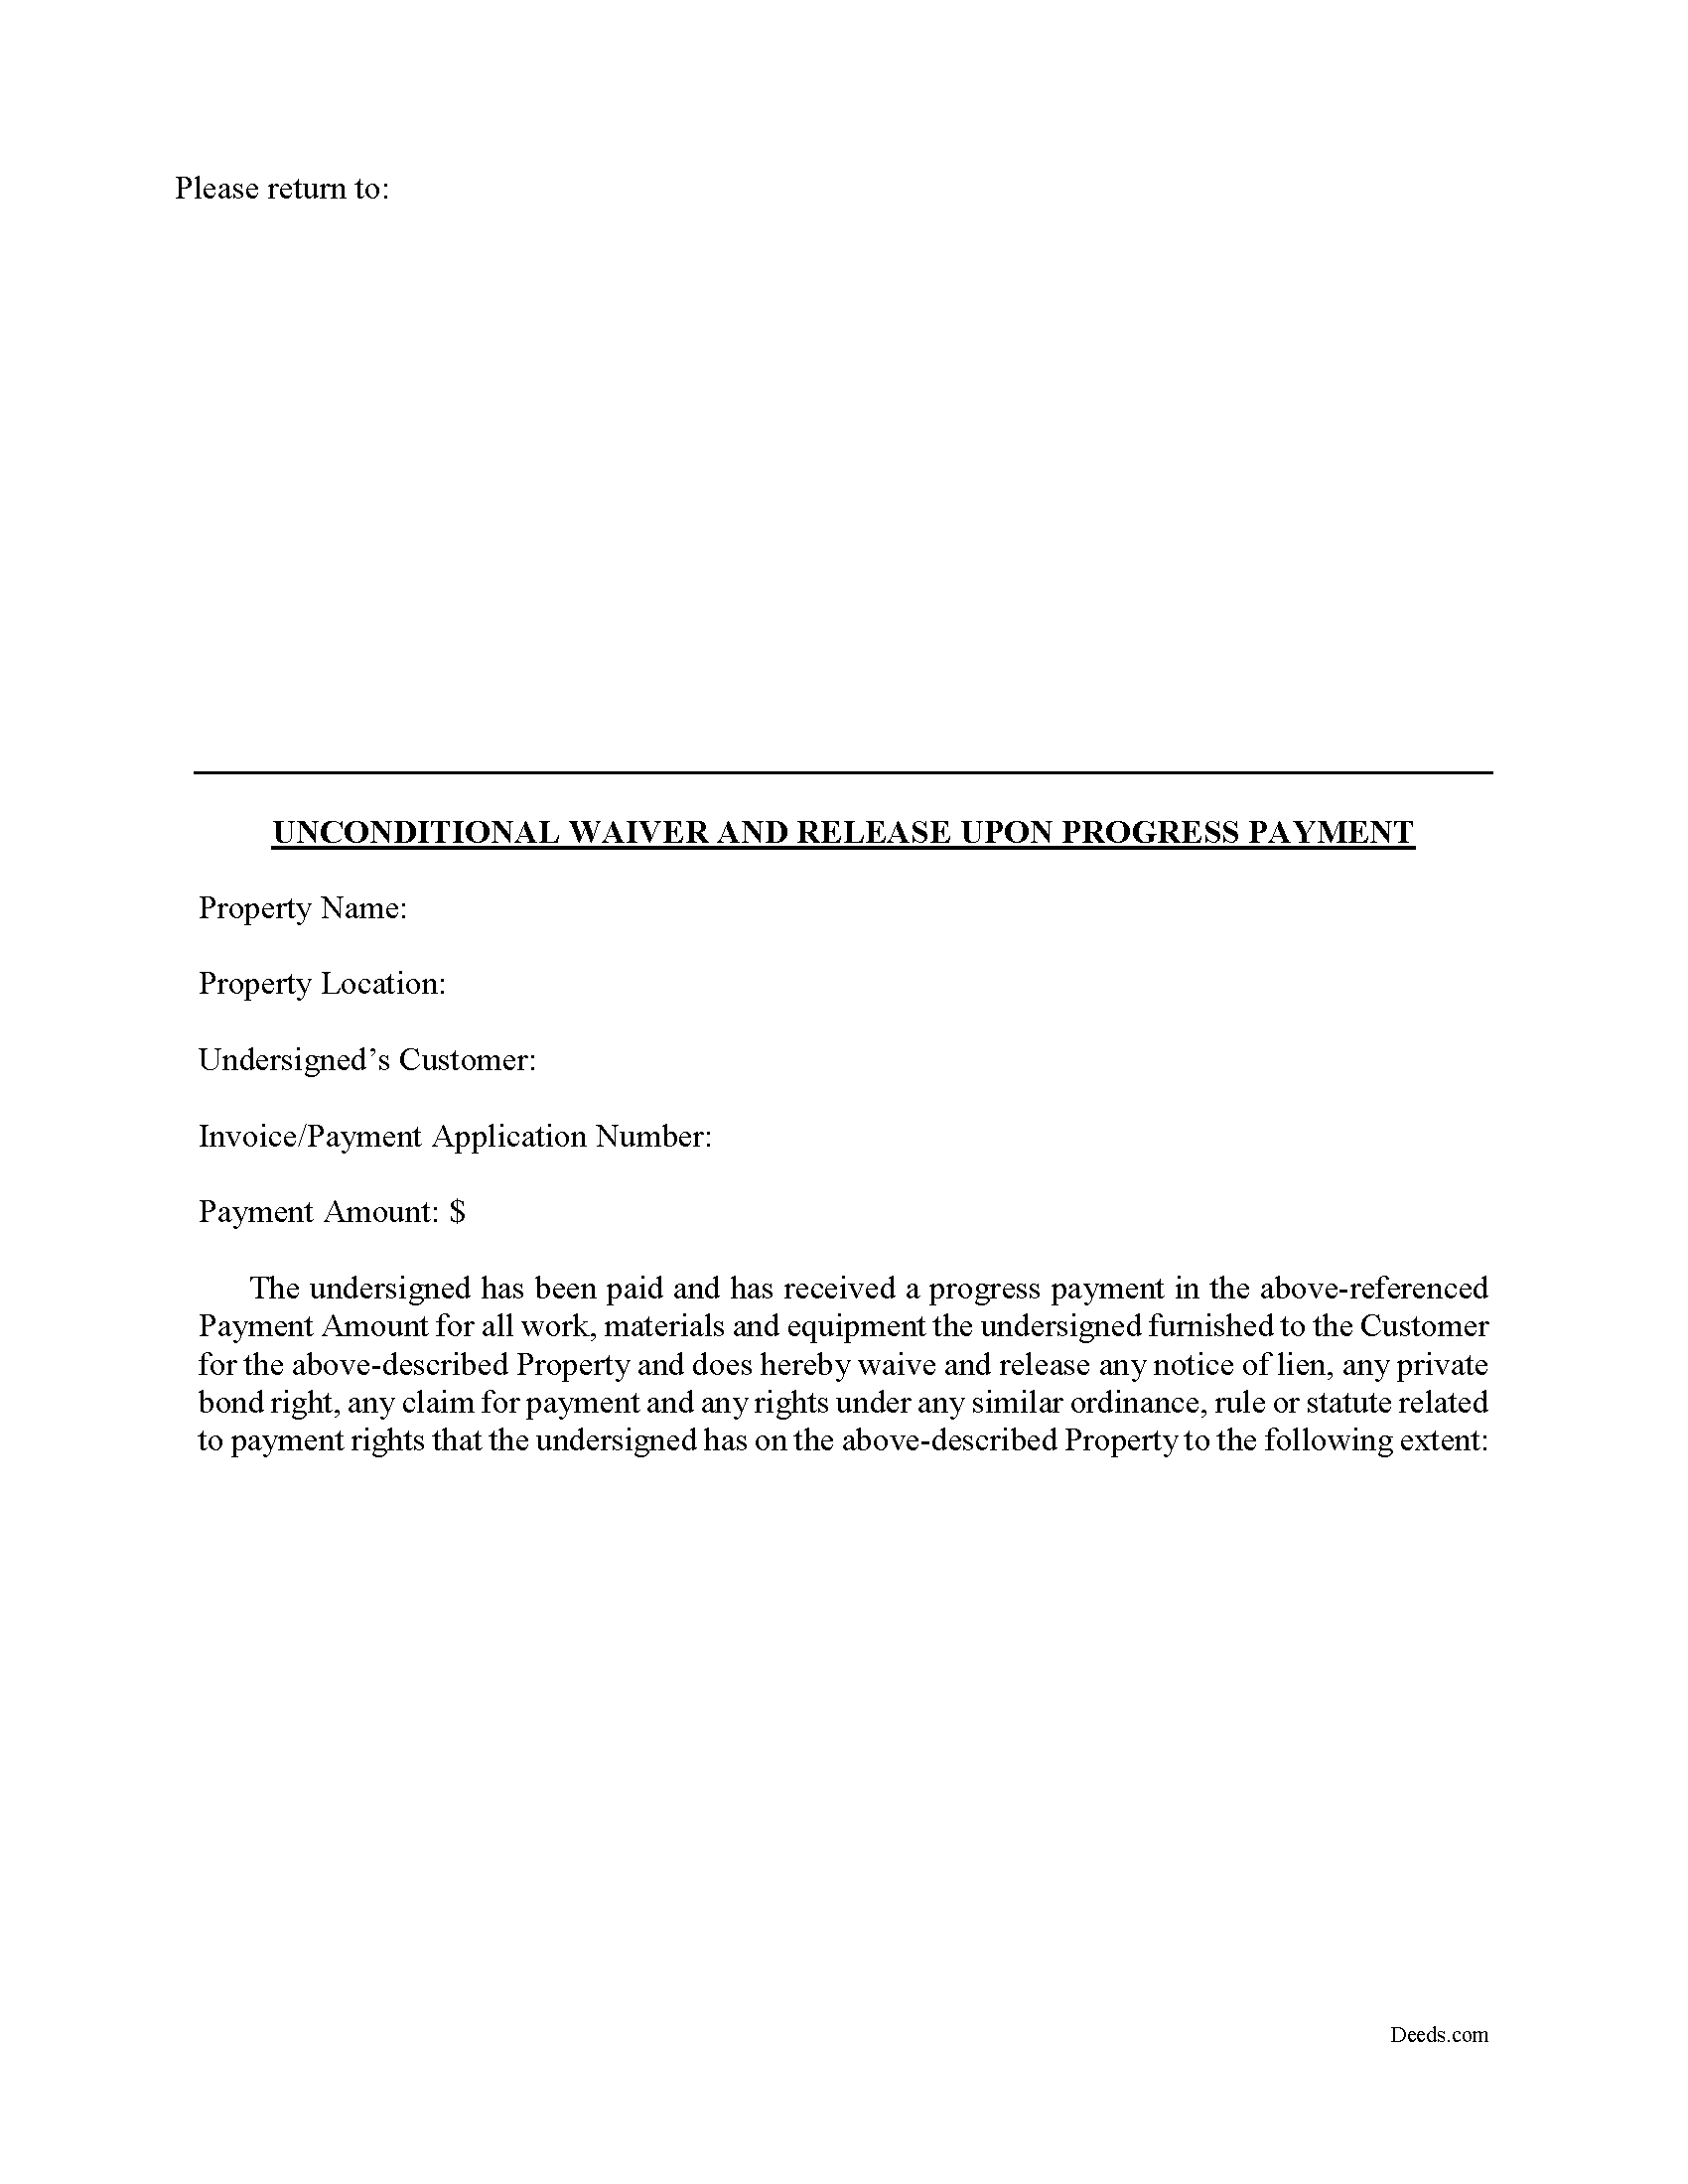 North Carolina Unconditional Waiver on Progress Payment Image